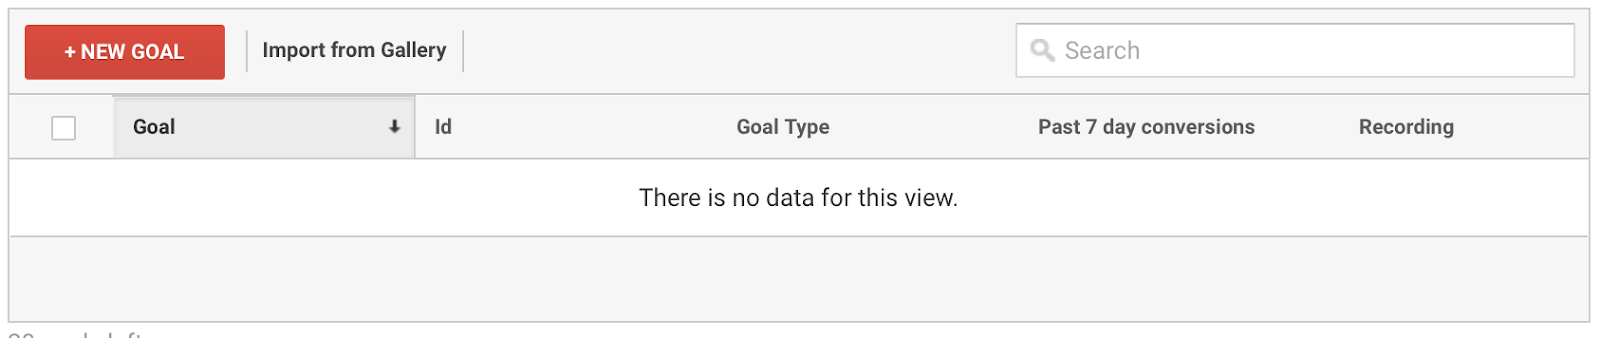 Guild for set up a lead capture goal in google analytics -new goal